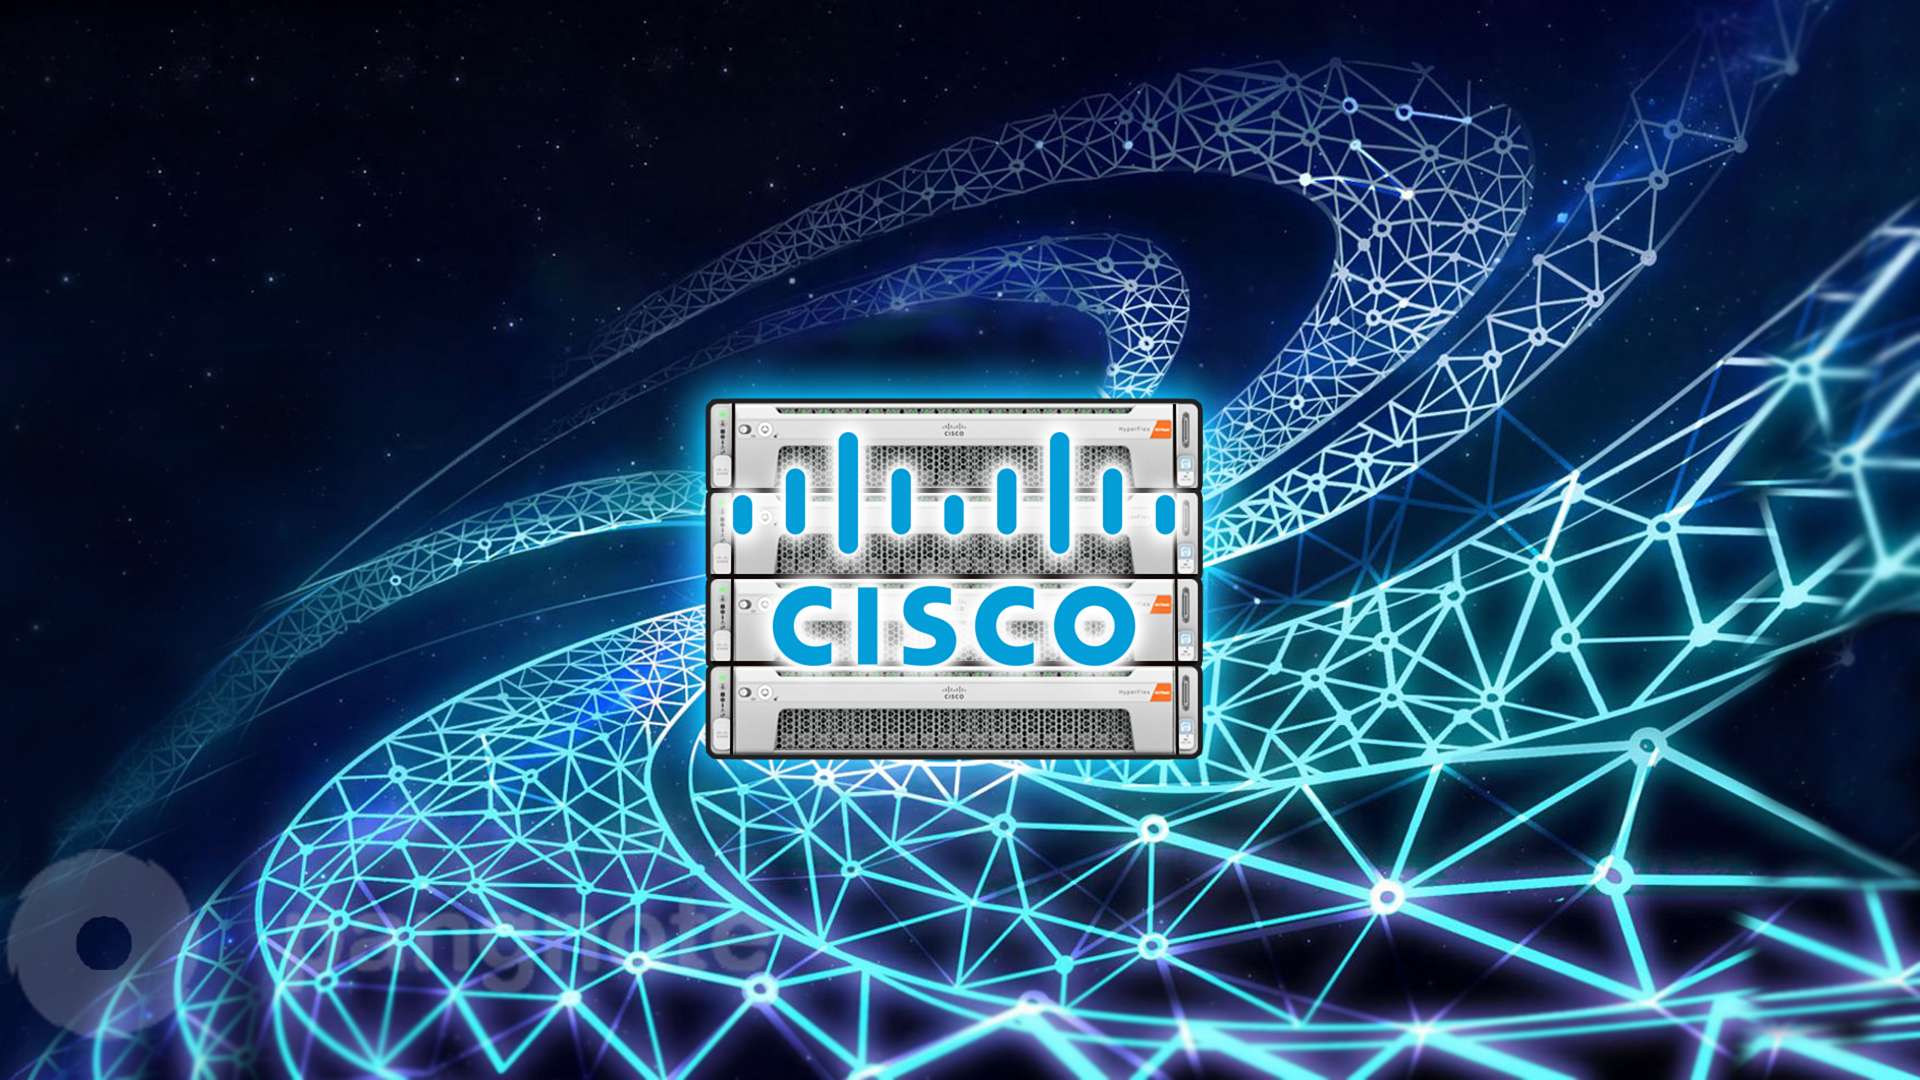 Cisco is developing a hyperconvergent ecosystem